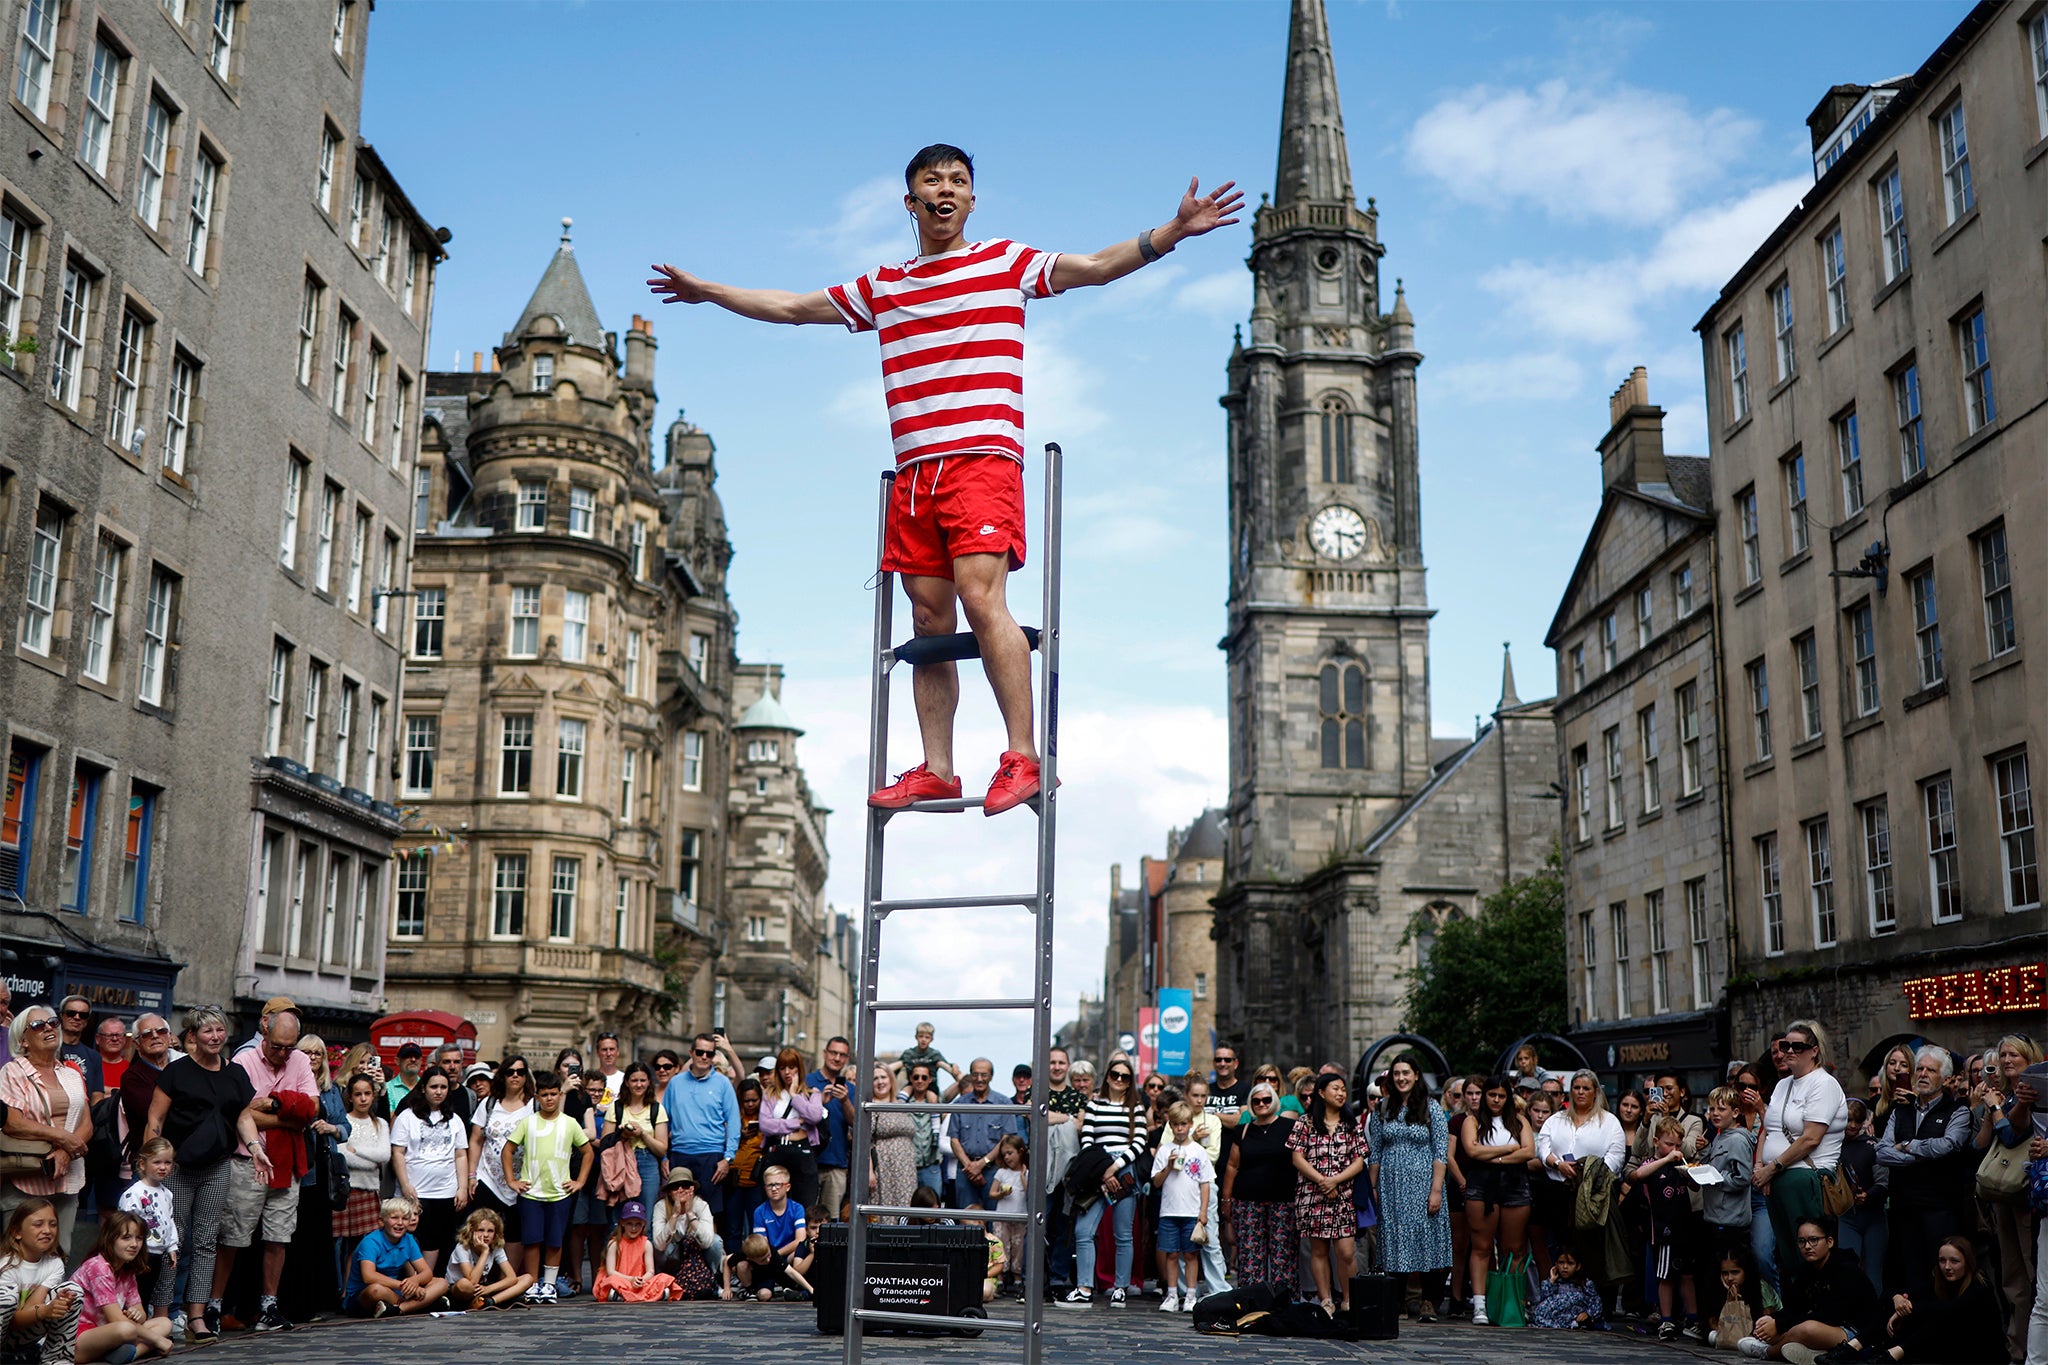 The Fringe Festival is popular with arts fans from around the world